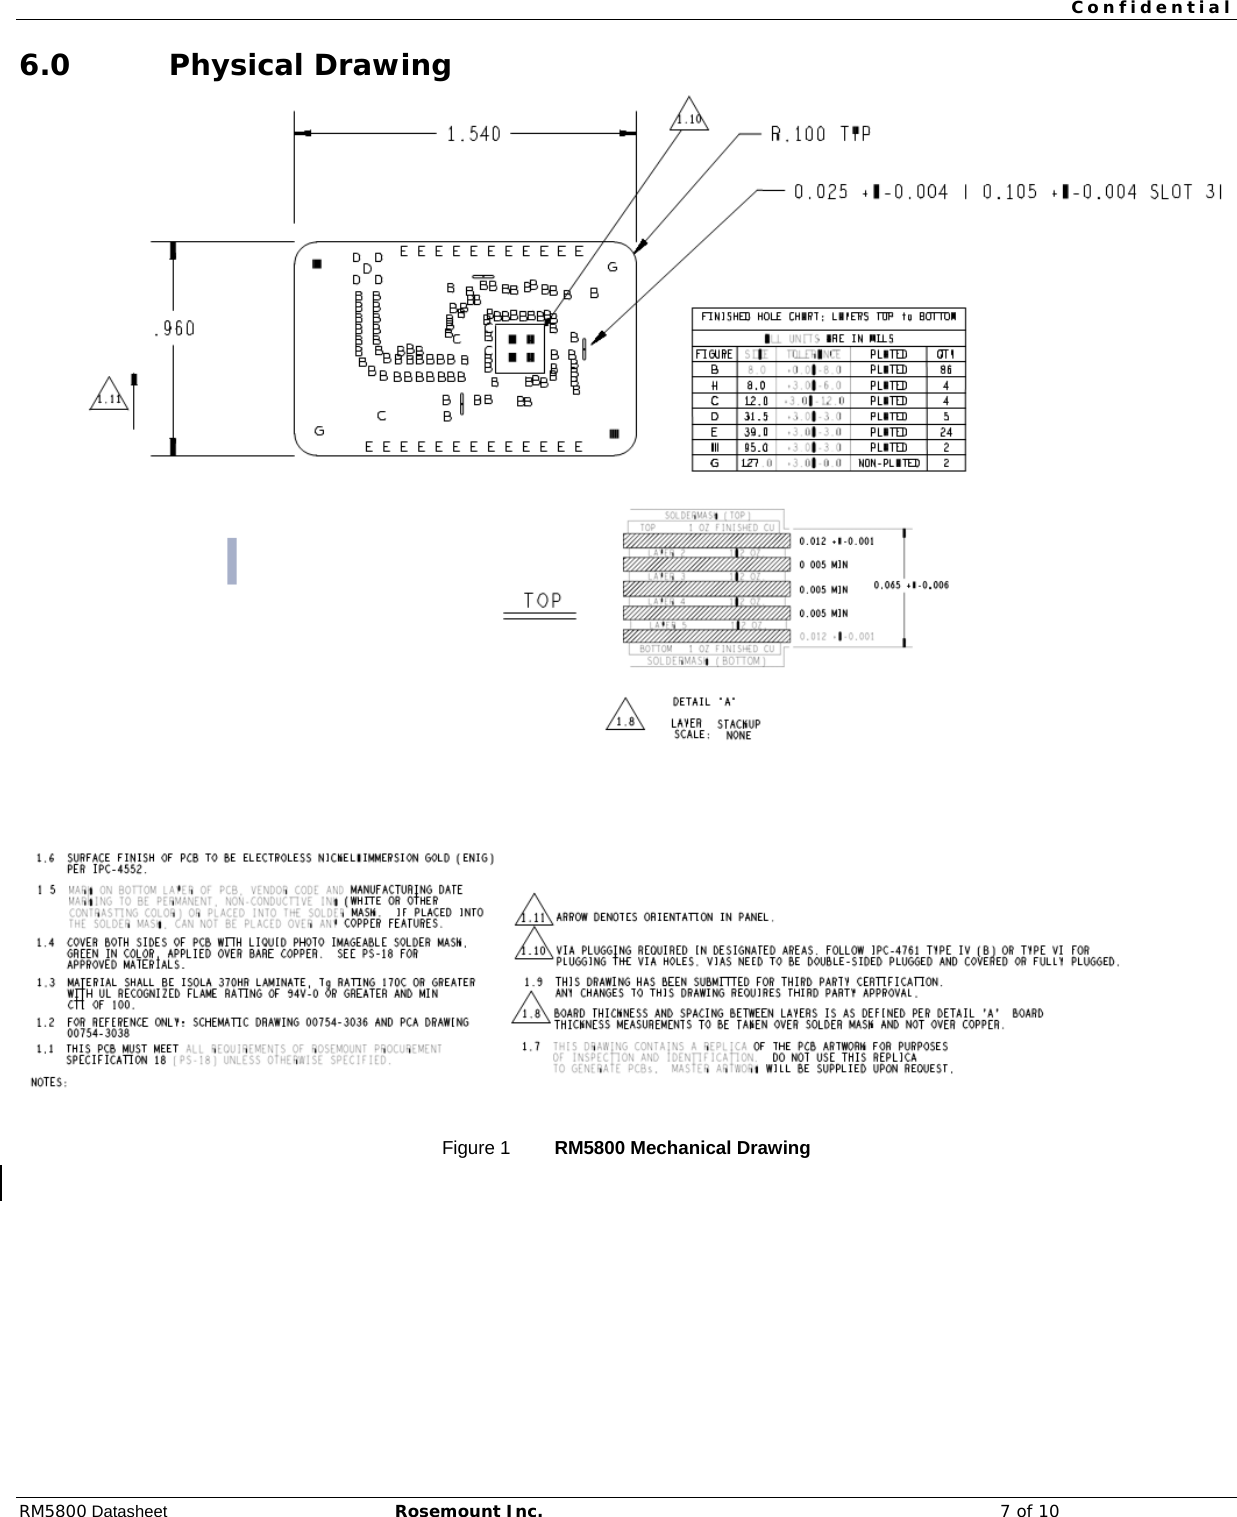  Confidential  RM5800 Datasheet Rosemount Inc. 7 of 10 6.0 Physical Drawing   Figure 1 RM5800 Mechanical Drawing 